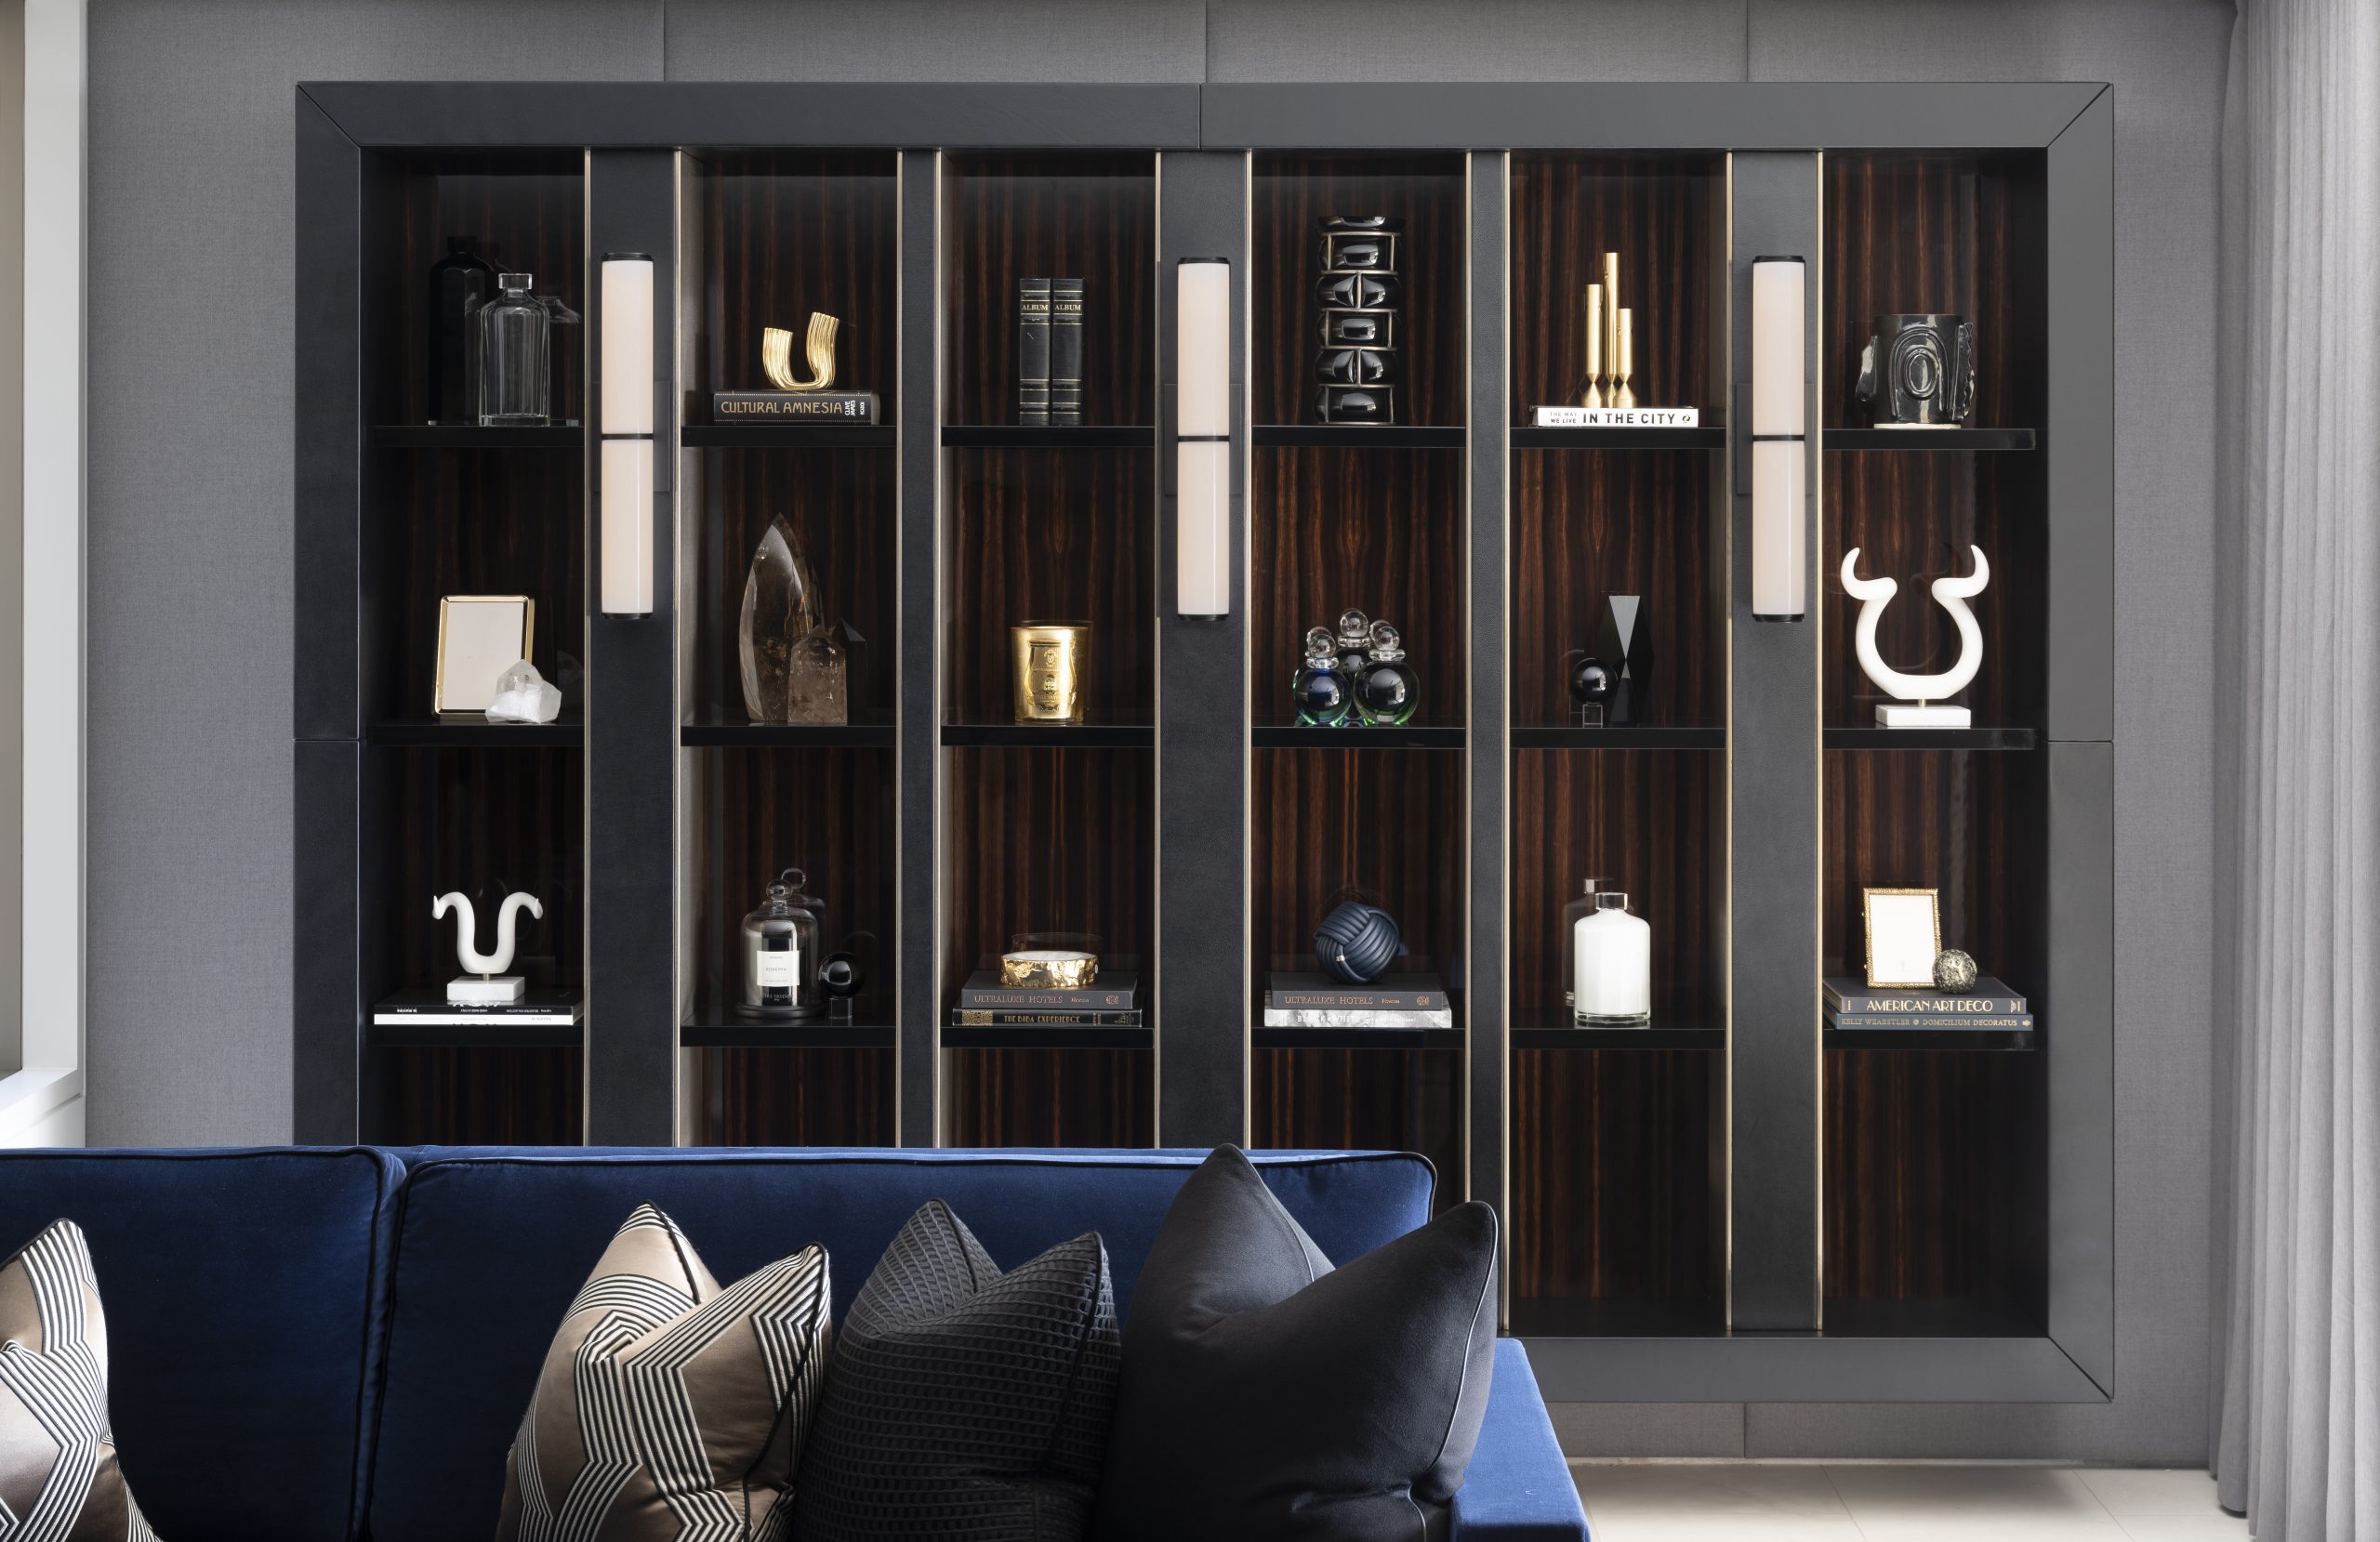 BLAINEY NORTH: CRAFTING LUXURY SPACES WITH A VISIONARY FLAIR